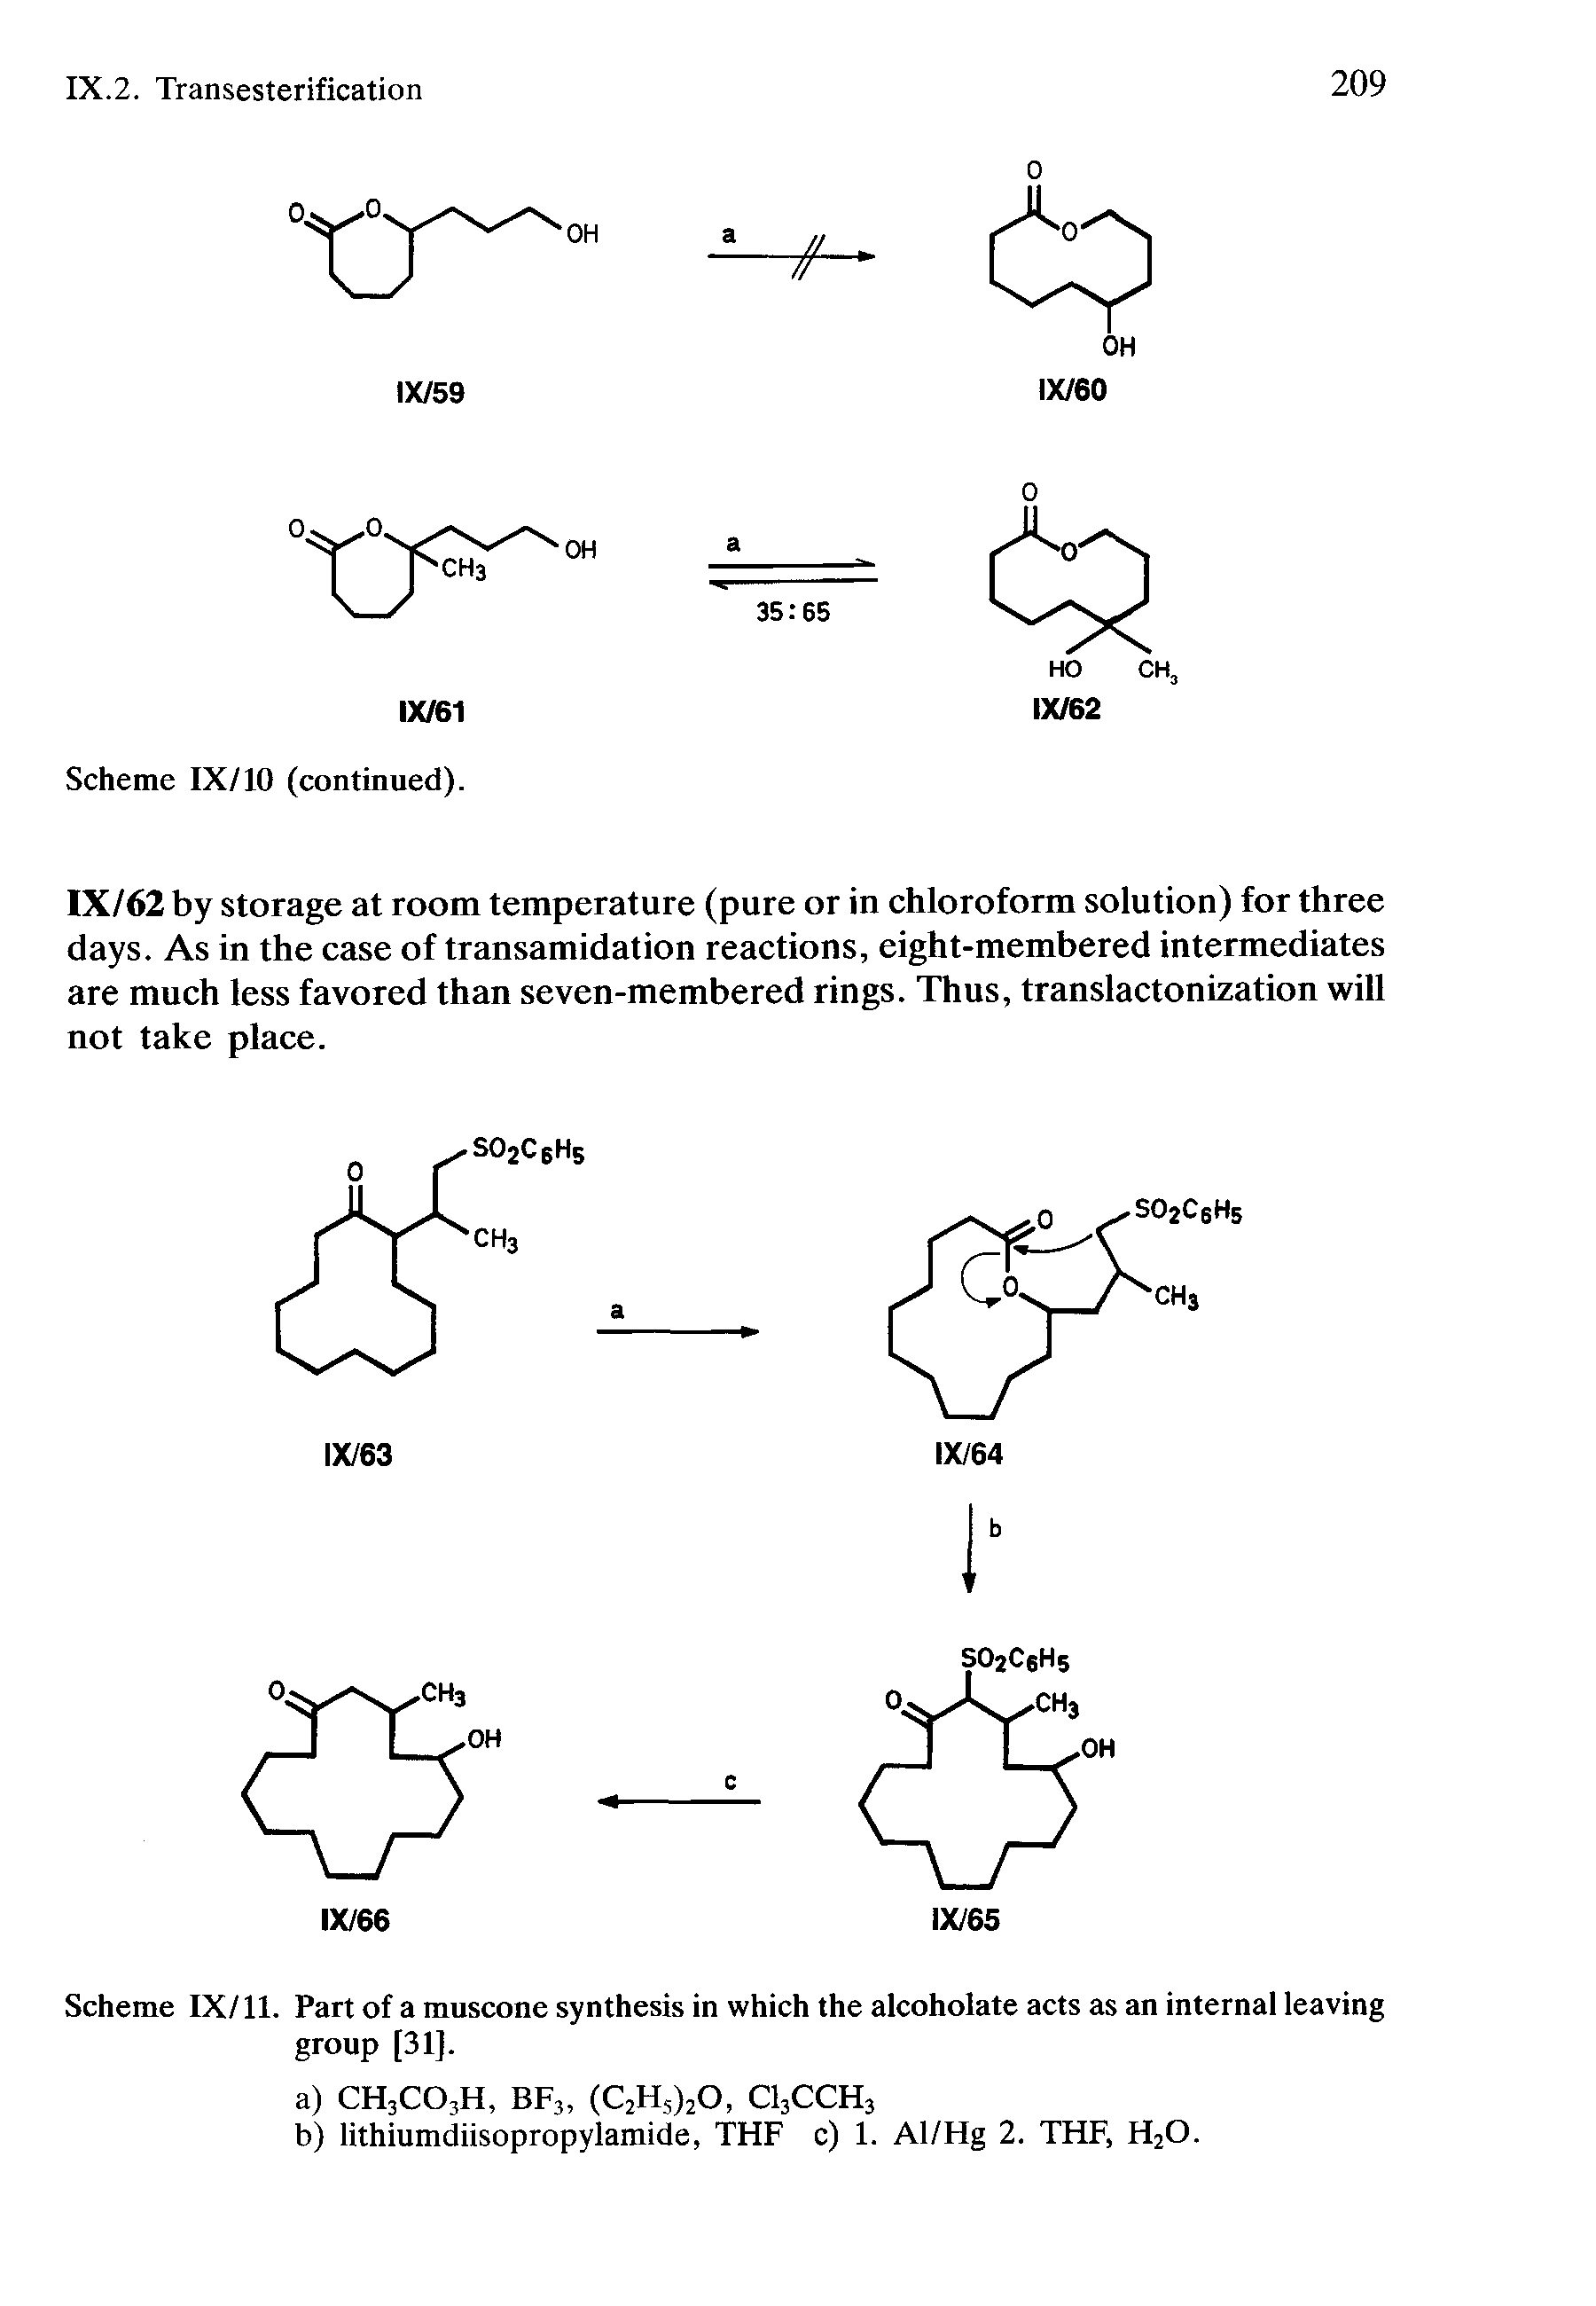 Scheme IX/11. Part of a muscone synthesis in which the alcoholate acts as an internal leaving group [31].